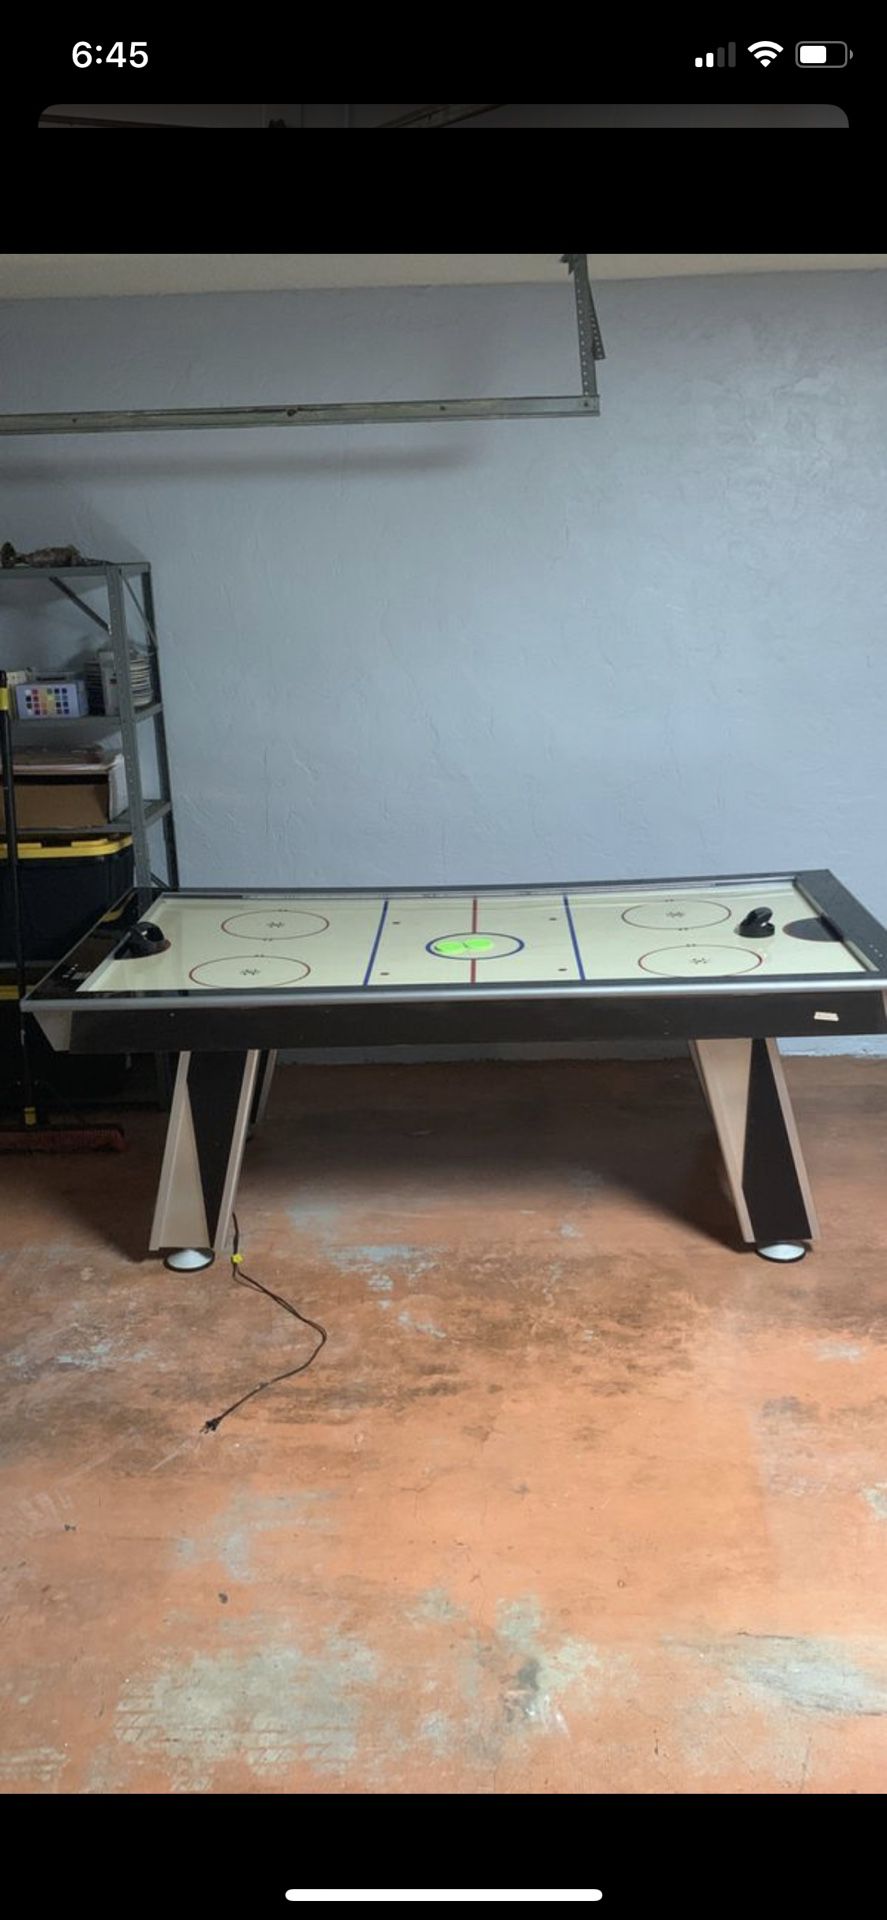 MD Sports Full Size Electronic Air Hockey Table